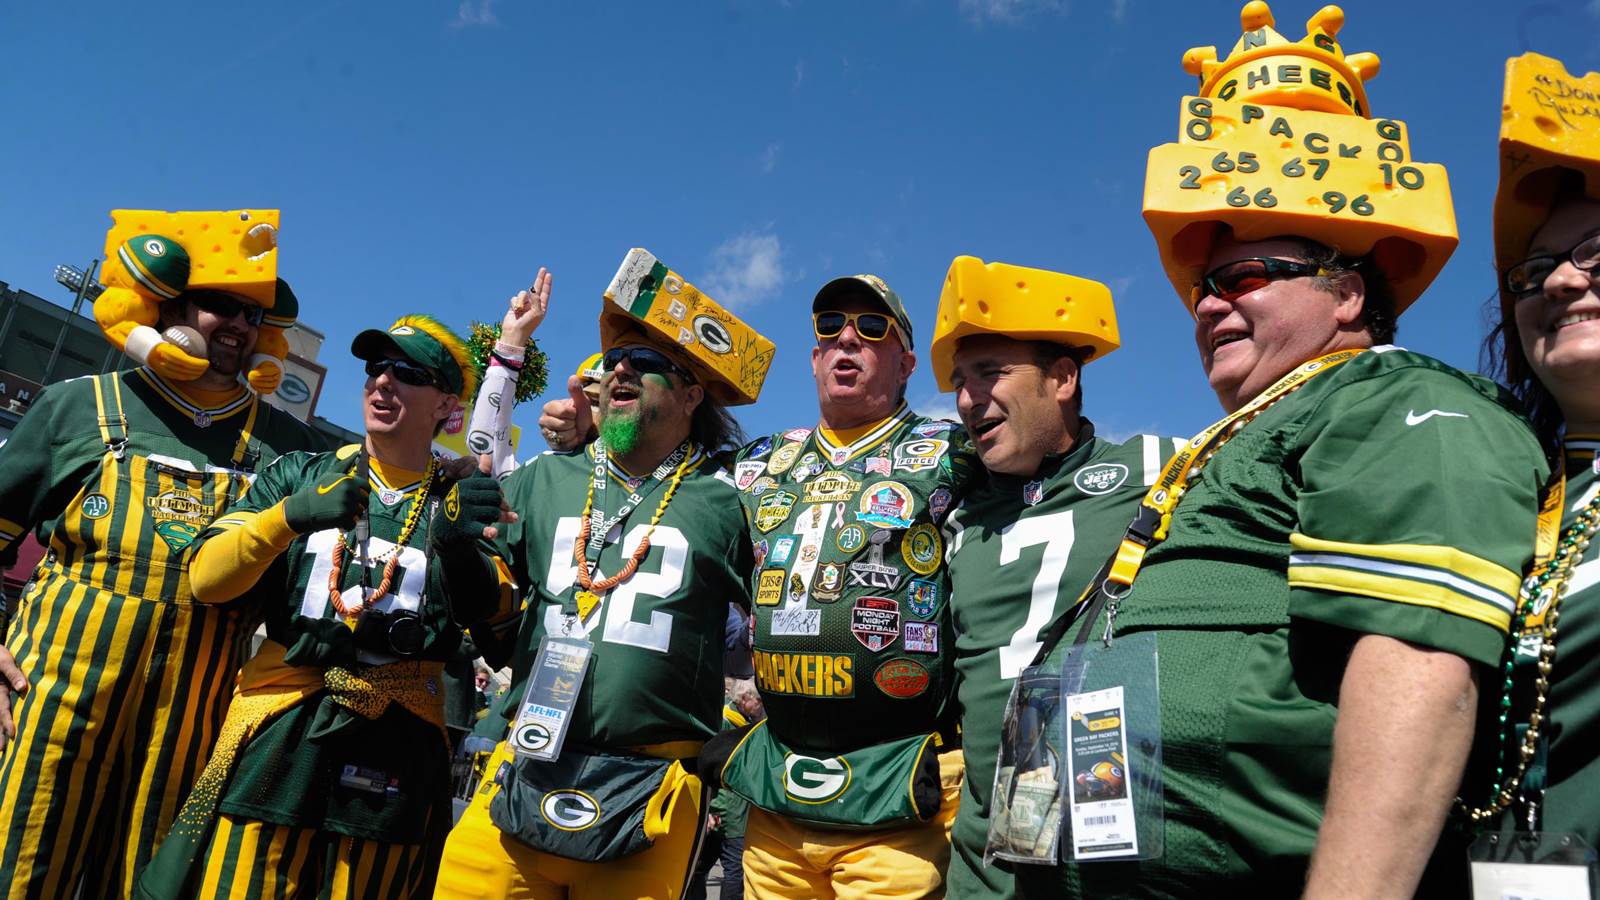 Antje utgaard in full support of the green bay packers antjeutgaard greenbay packers fan